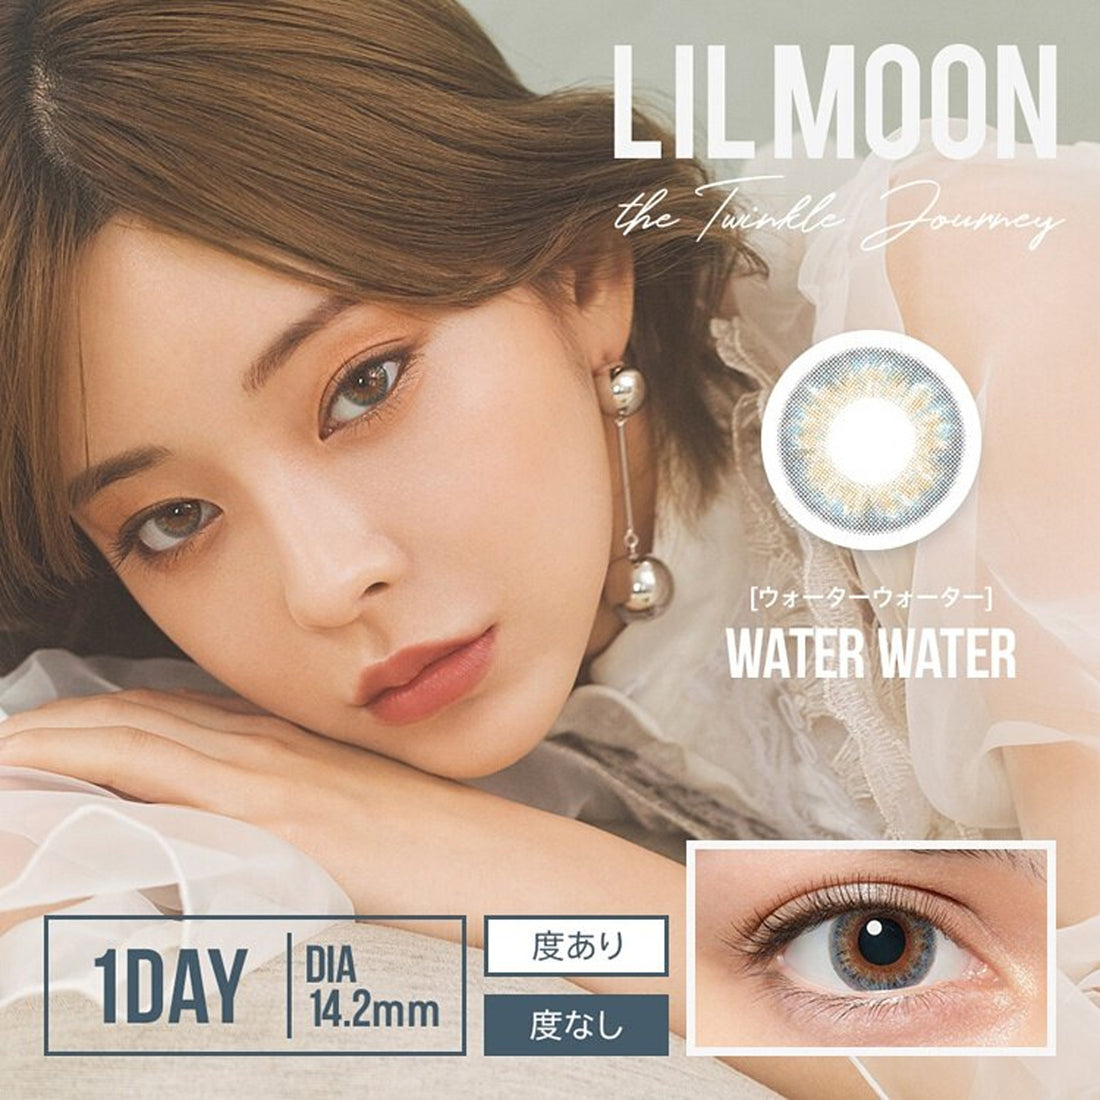 LIL MOON Daily Contact Lenses-Water Water 10lenses